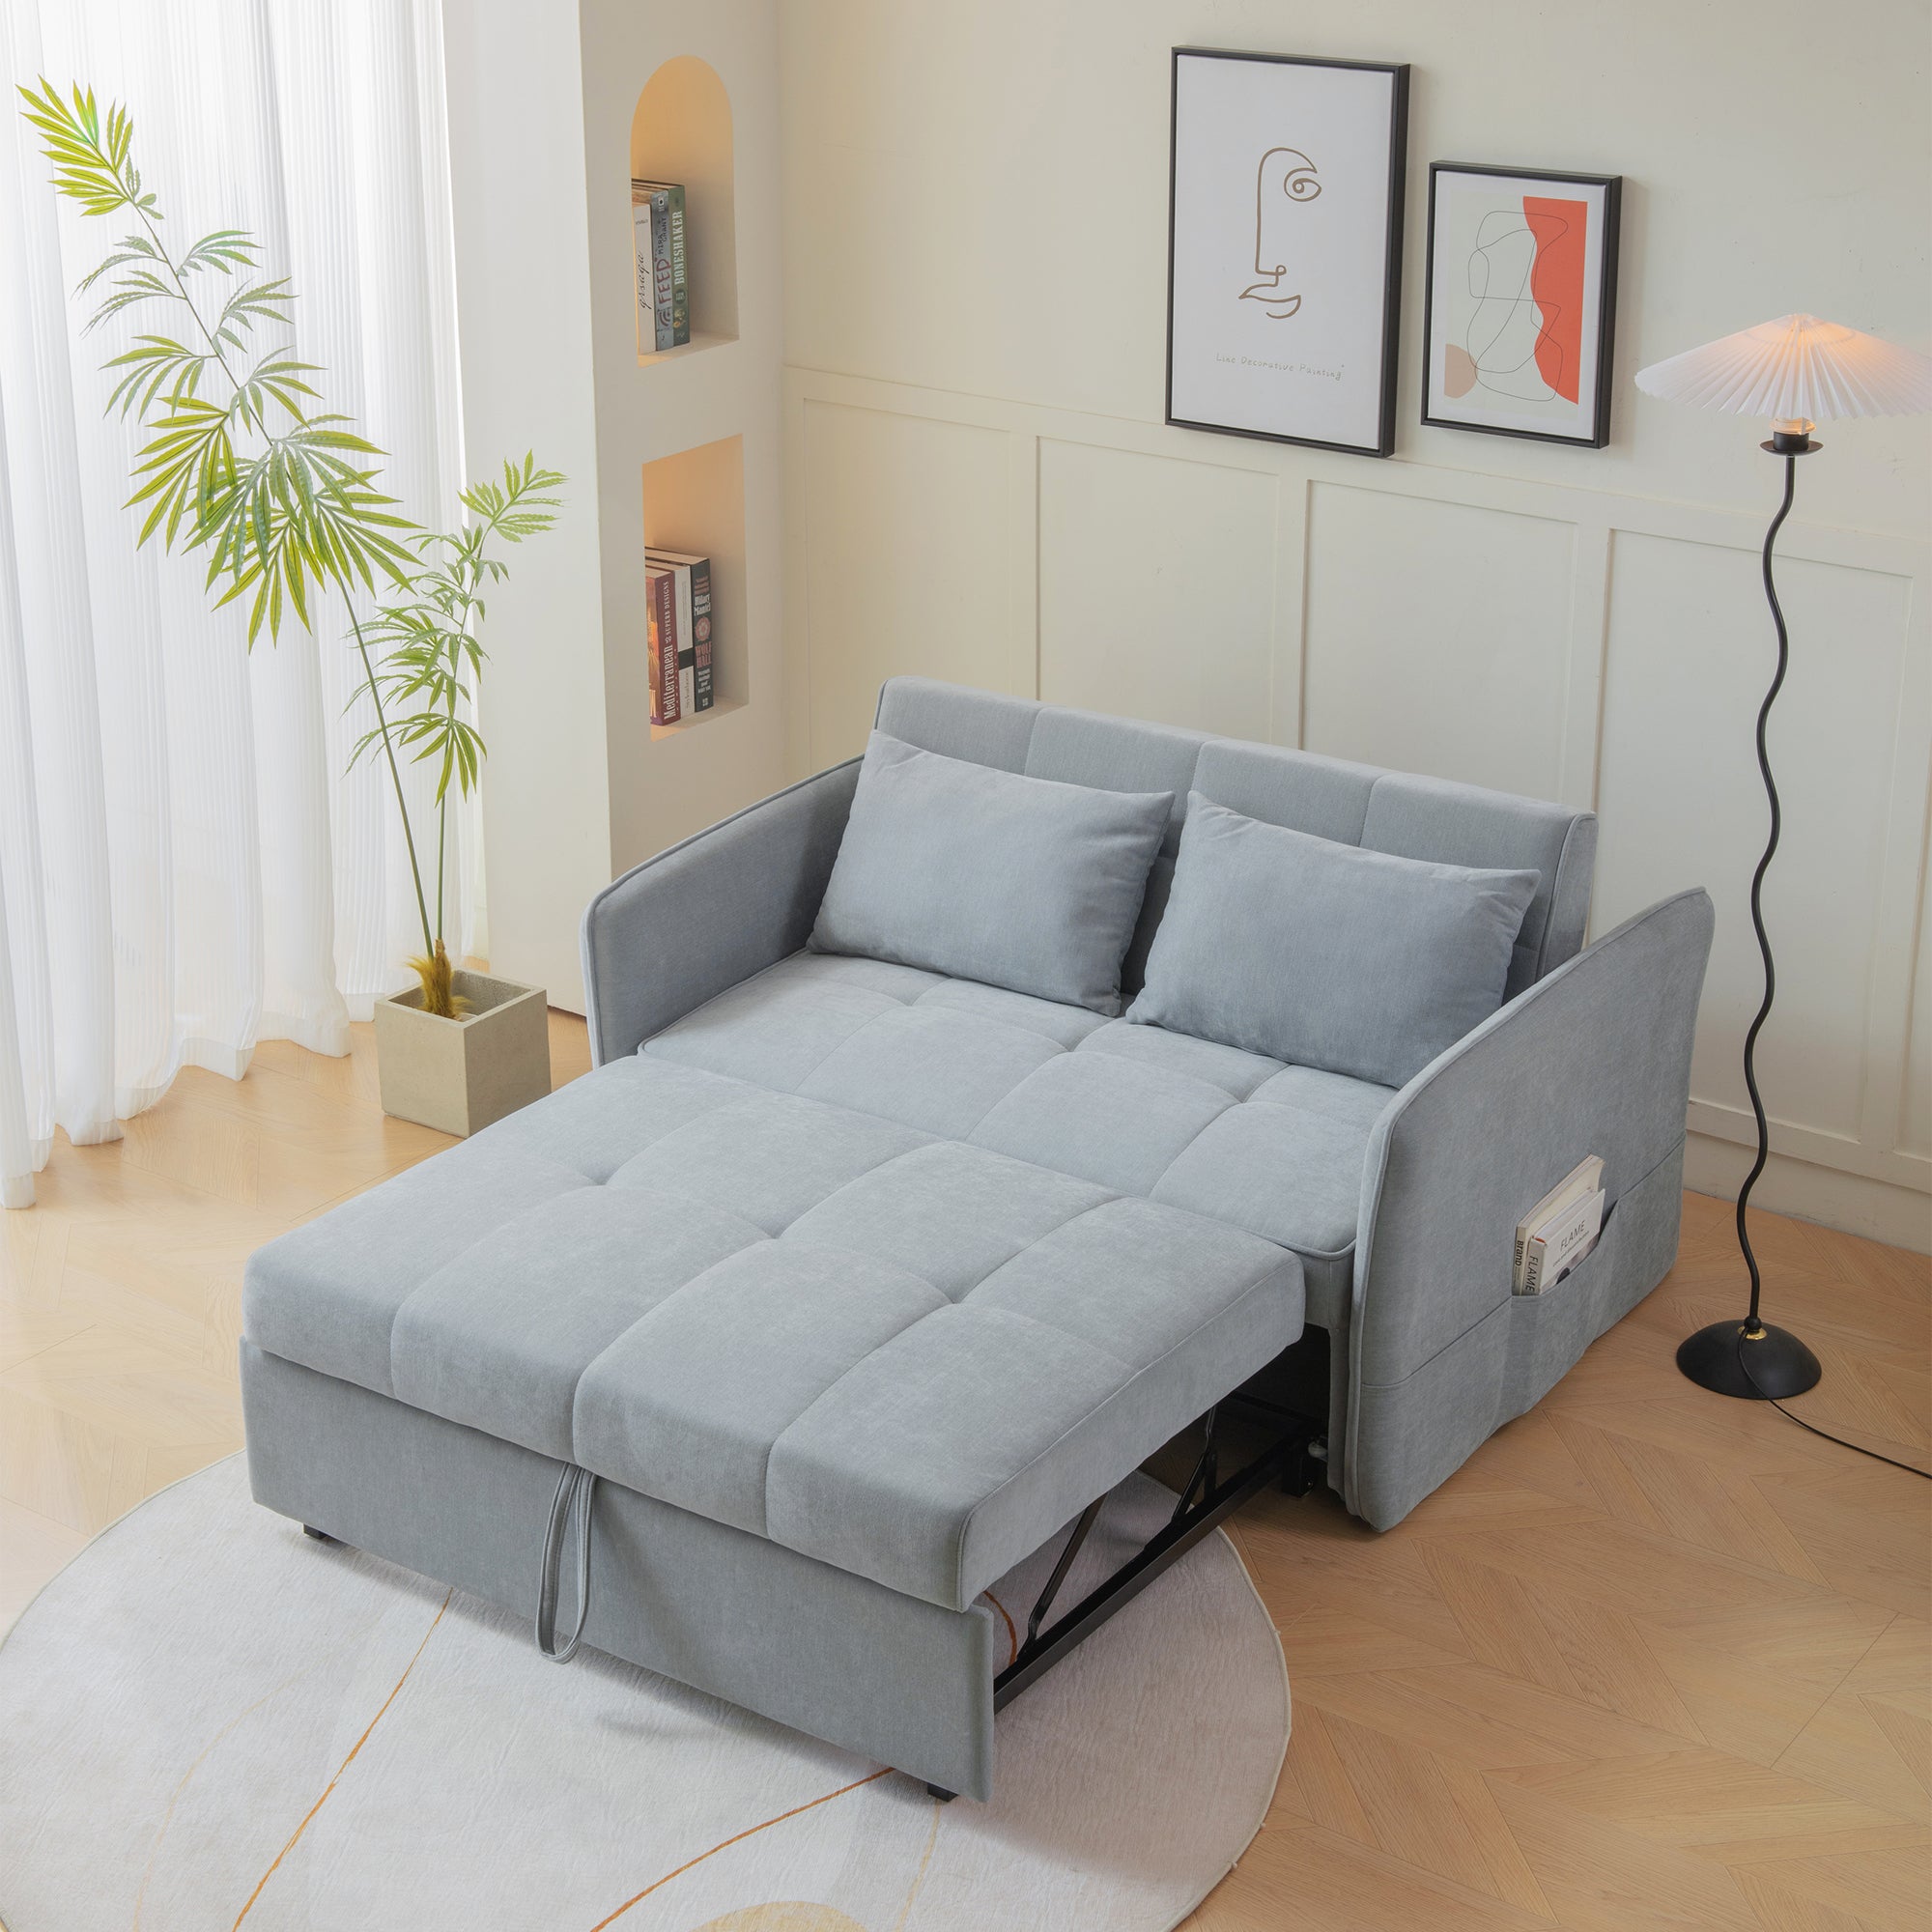 Chenille fabric pull out sofa bed,sleeper loveseat grey-fabric